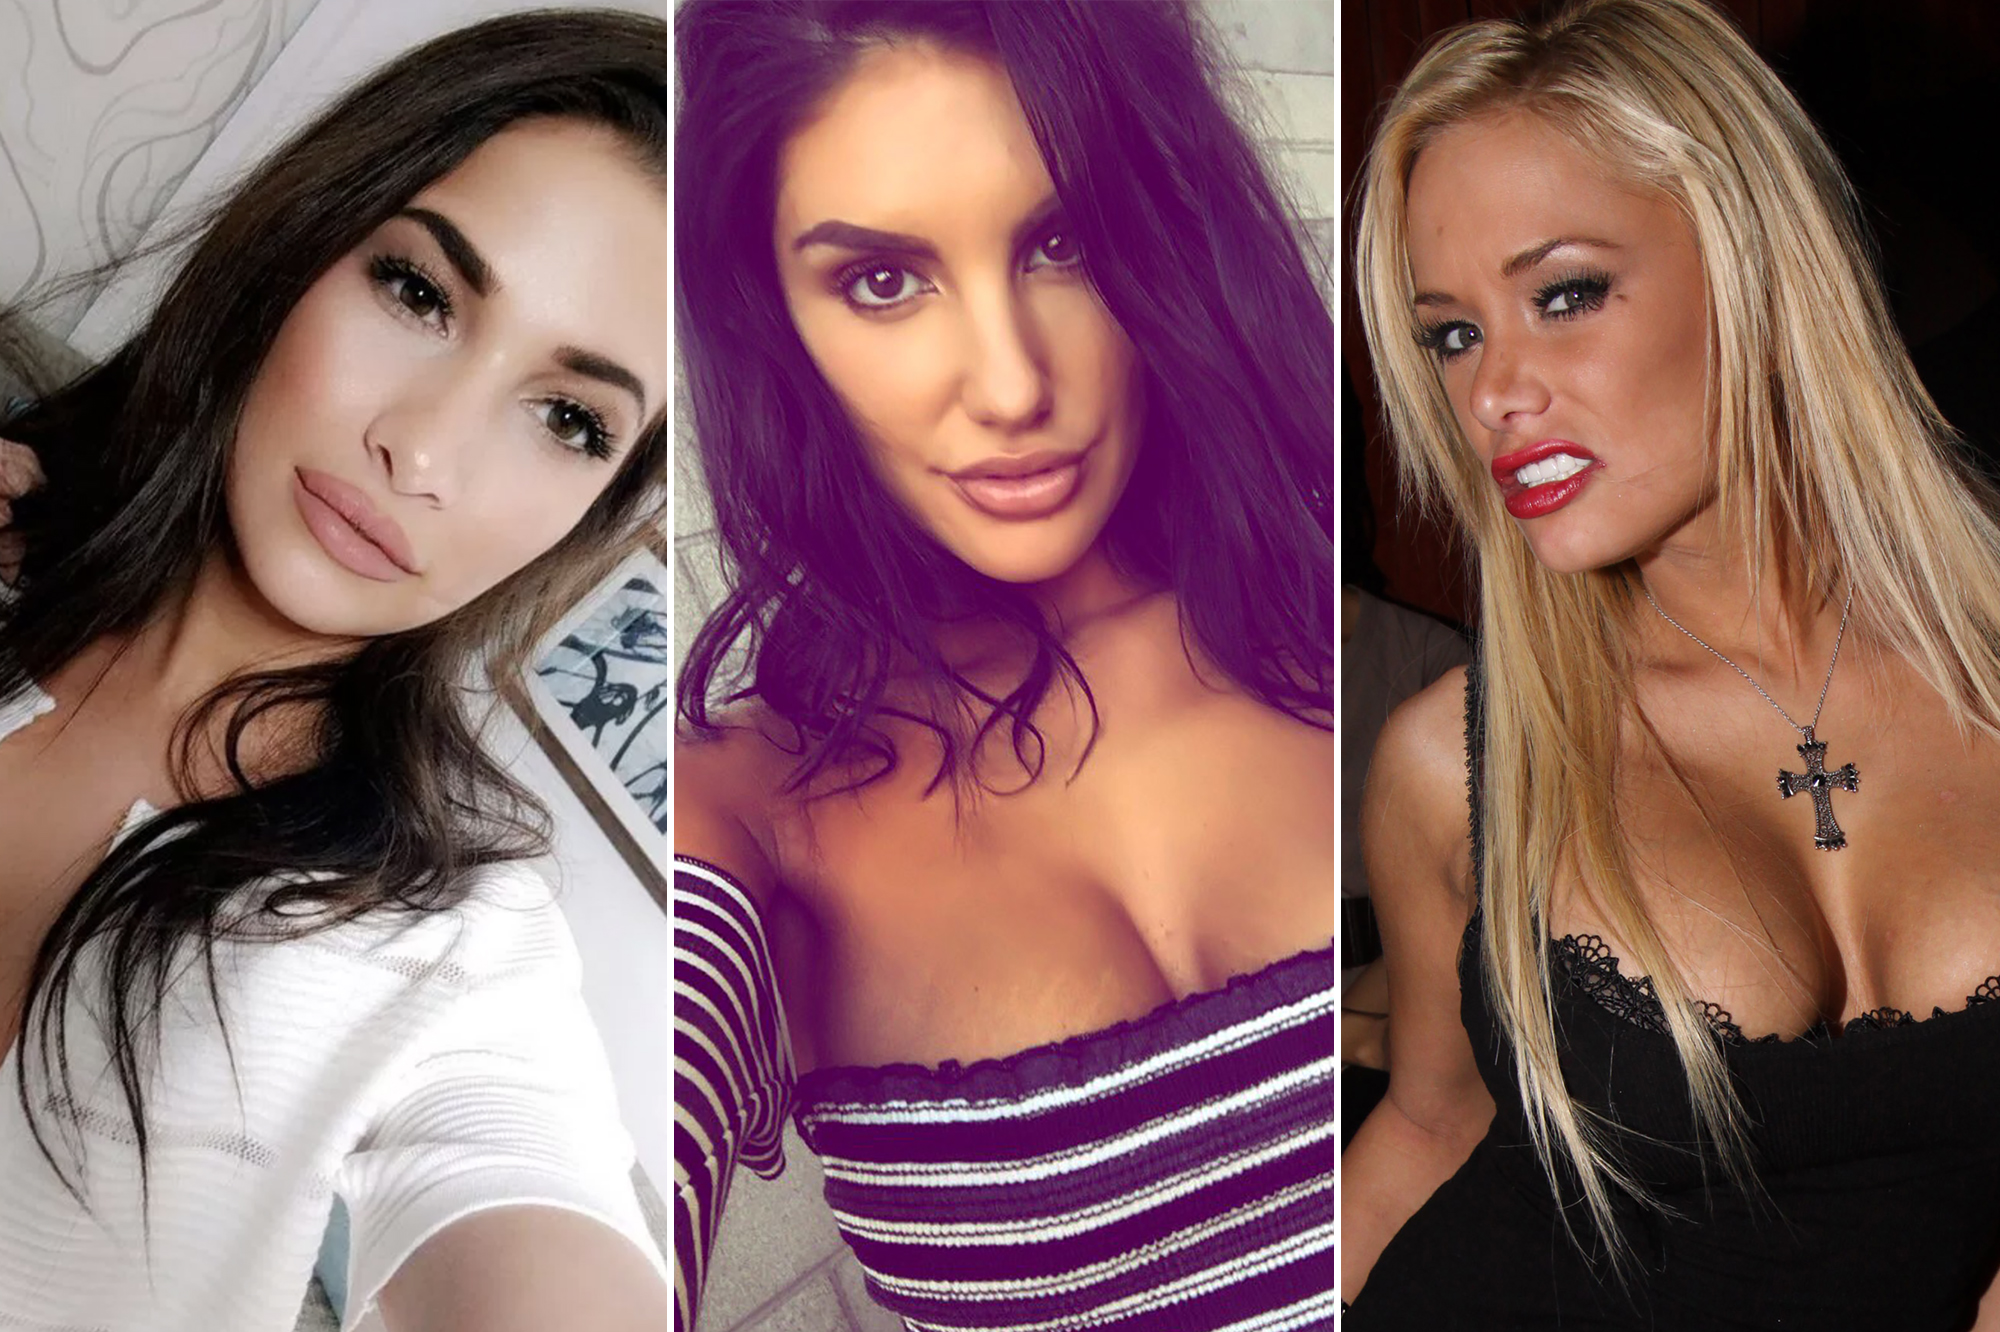 candice raymer recommends Most Beautiful Pornstars 2018